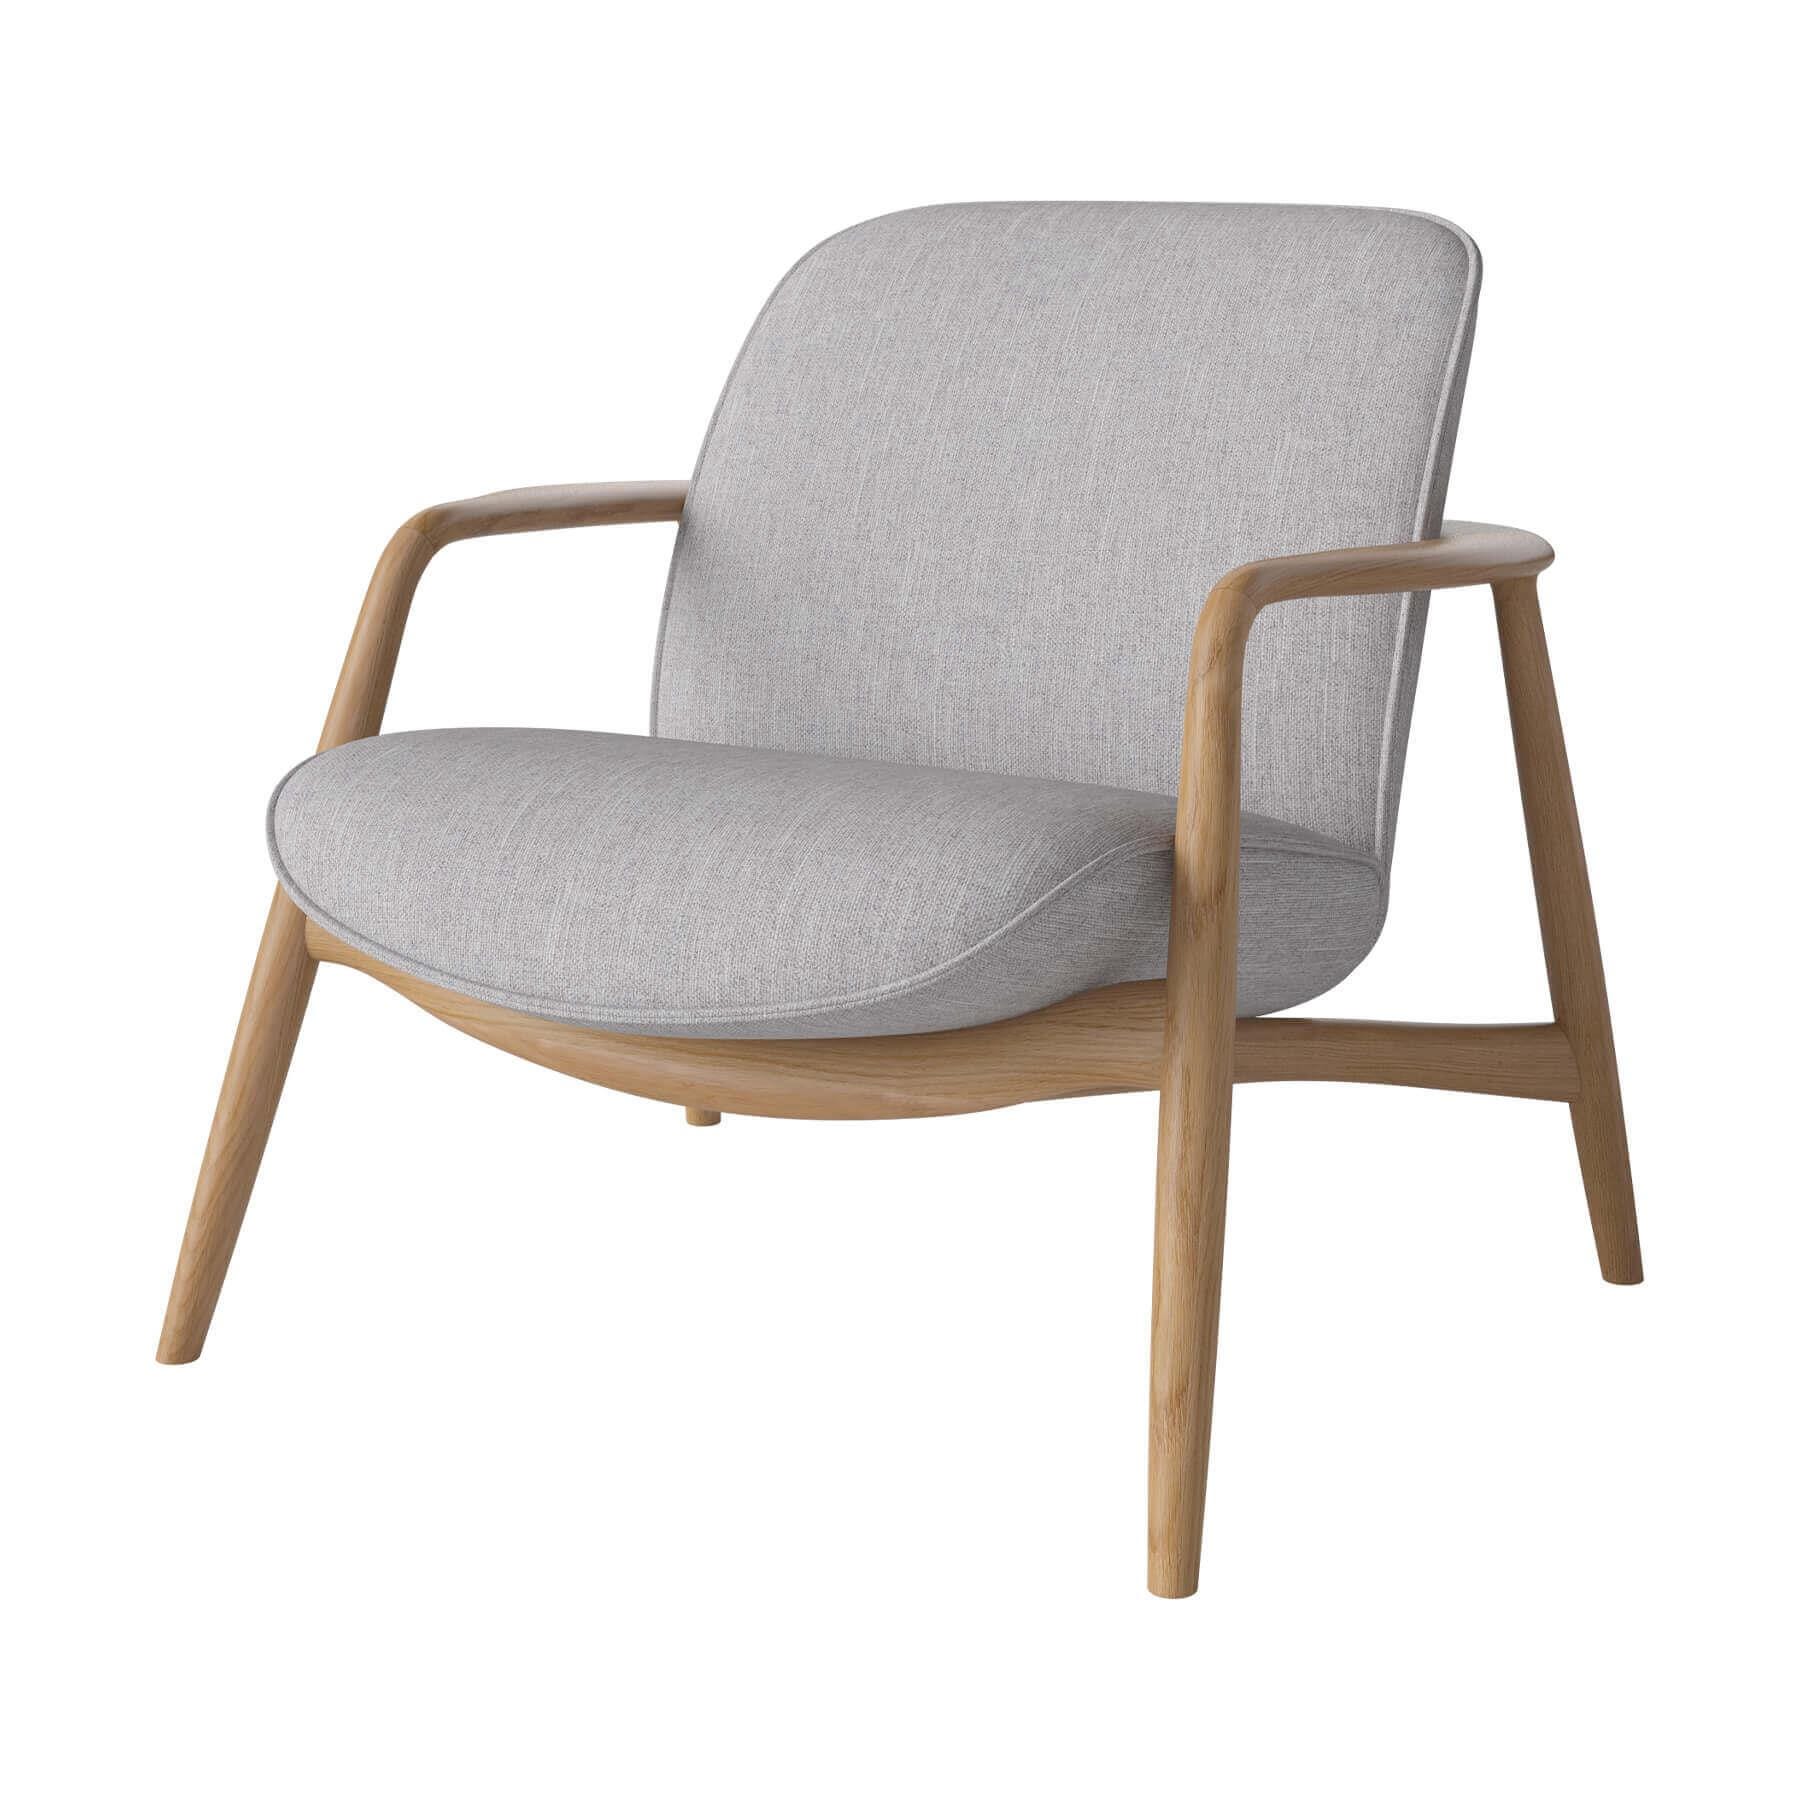 Bolia Bowie Armchair Oiled Oak Baize Light Grey Designer Furniture From Holloways Of Ludlow